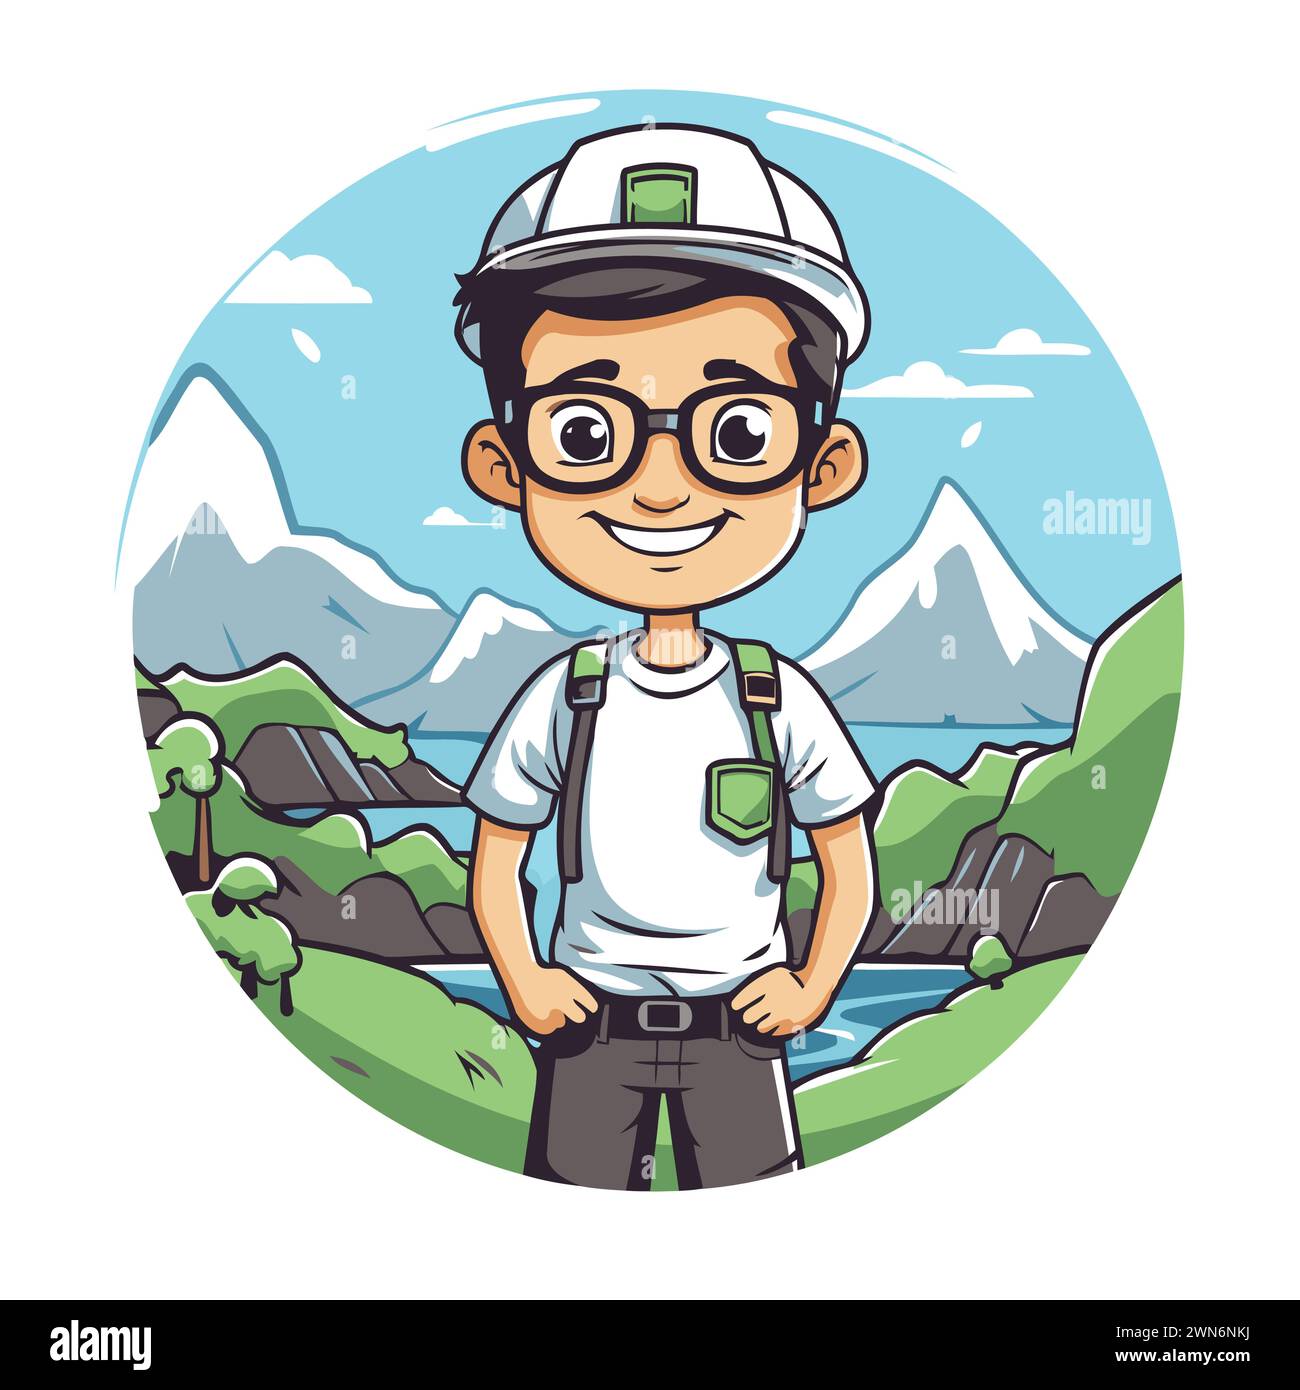 Tourist boy with hat and backpack in the mountains round icon vector illustration graphic design Stock Vector